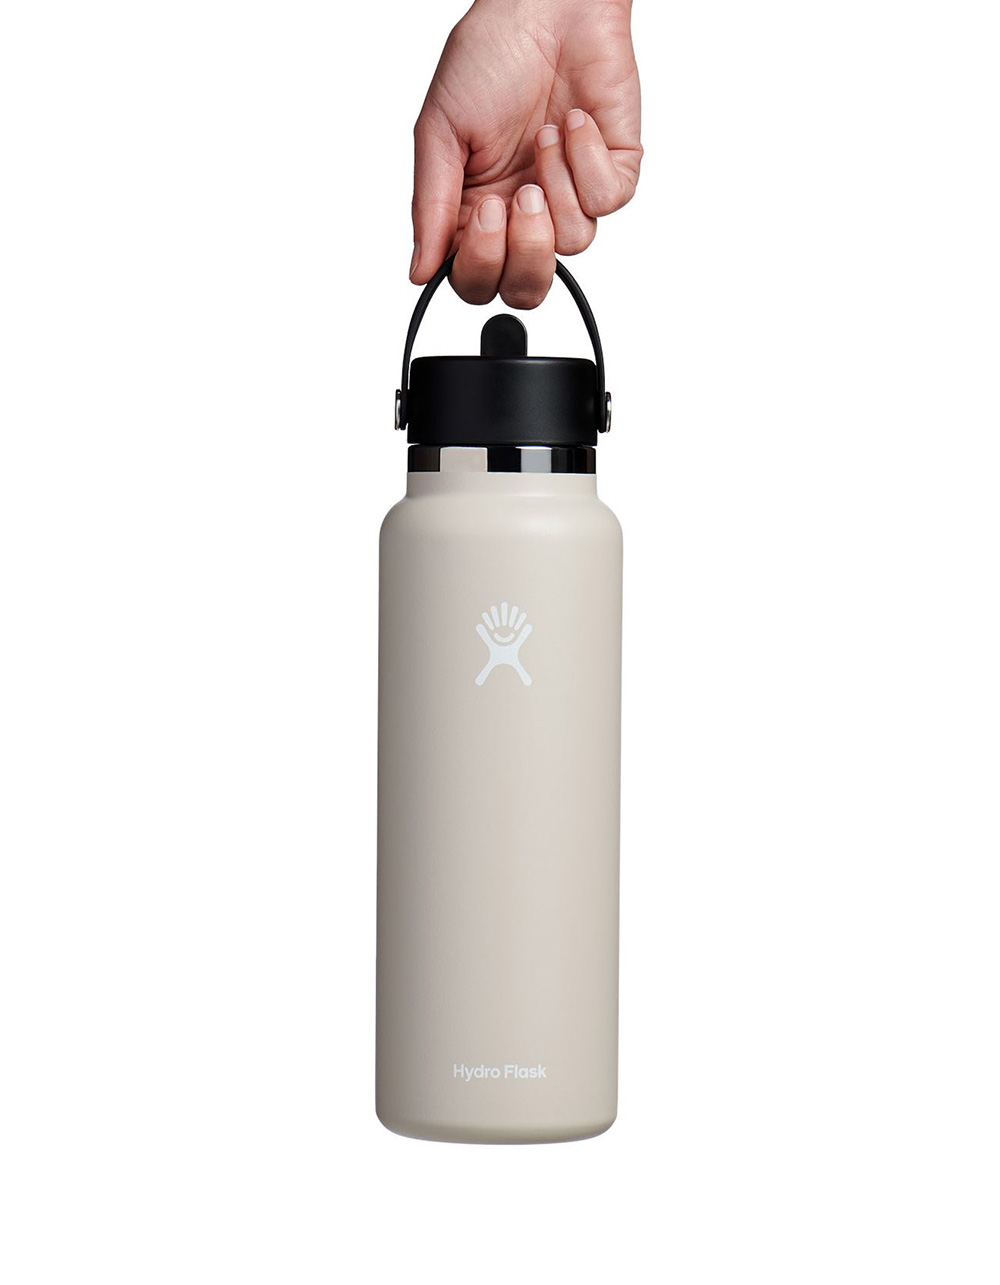 40 Oz Wide Mouth Water Bottle With Straw Lid